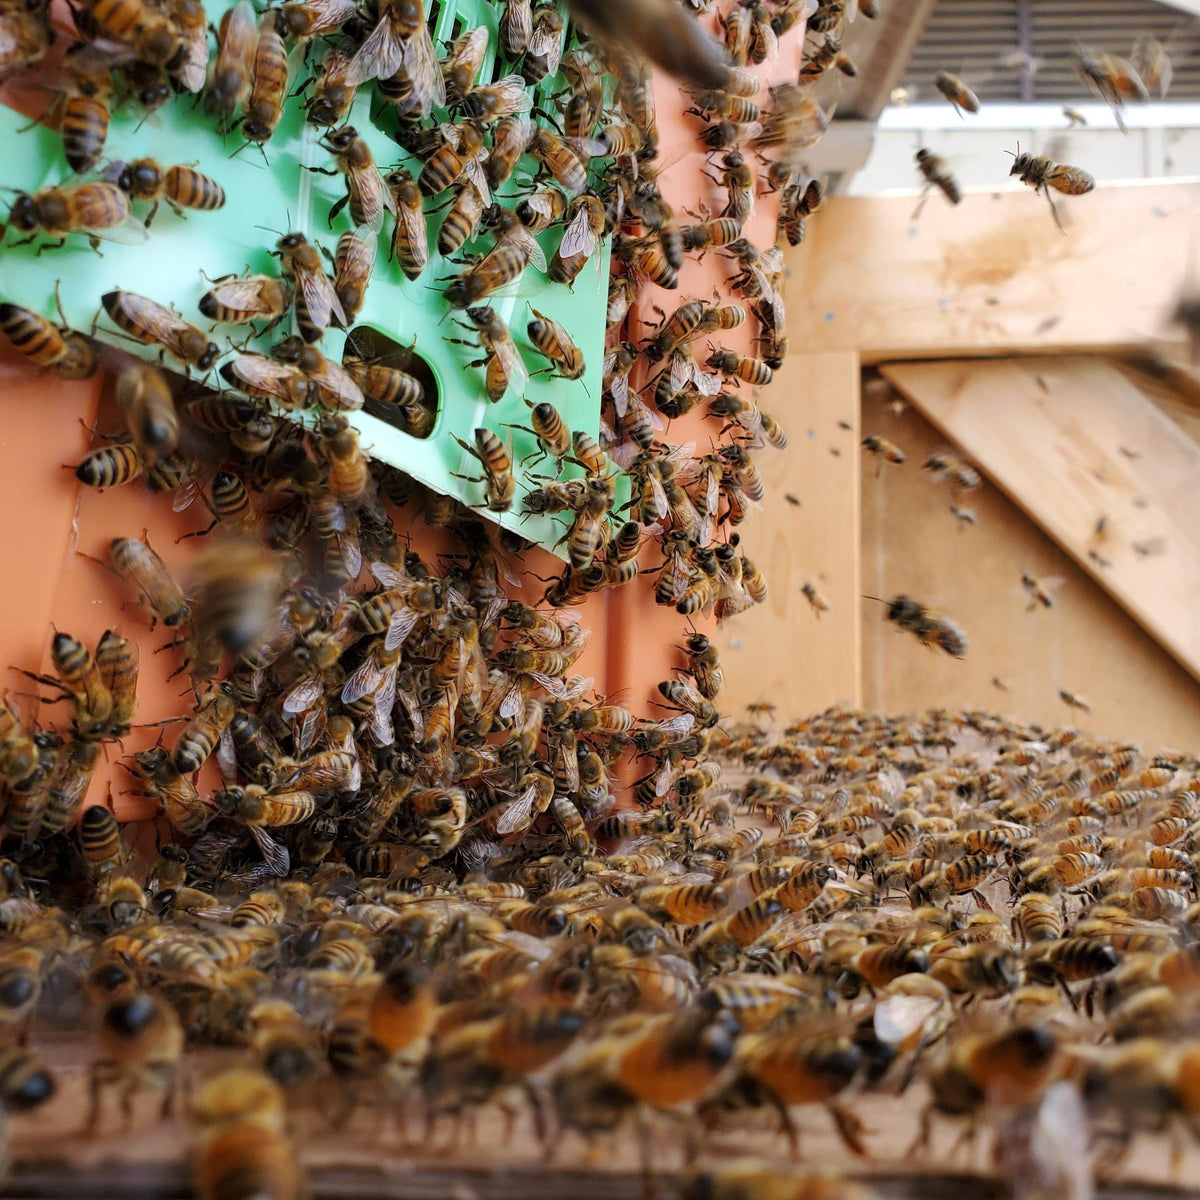 Swarming and Moving Bees – Foxhound Bee Company